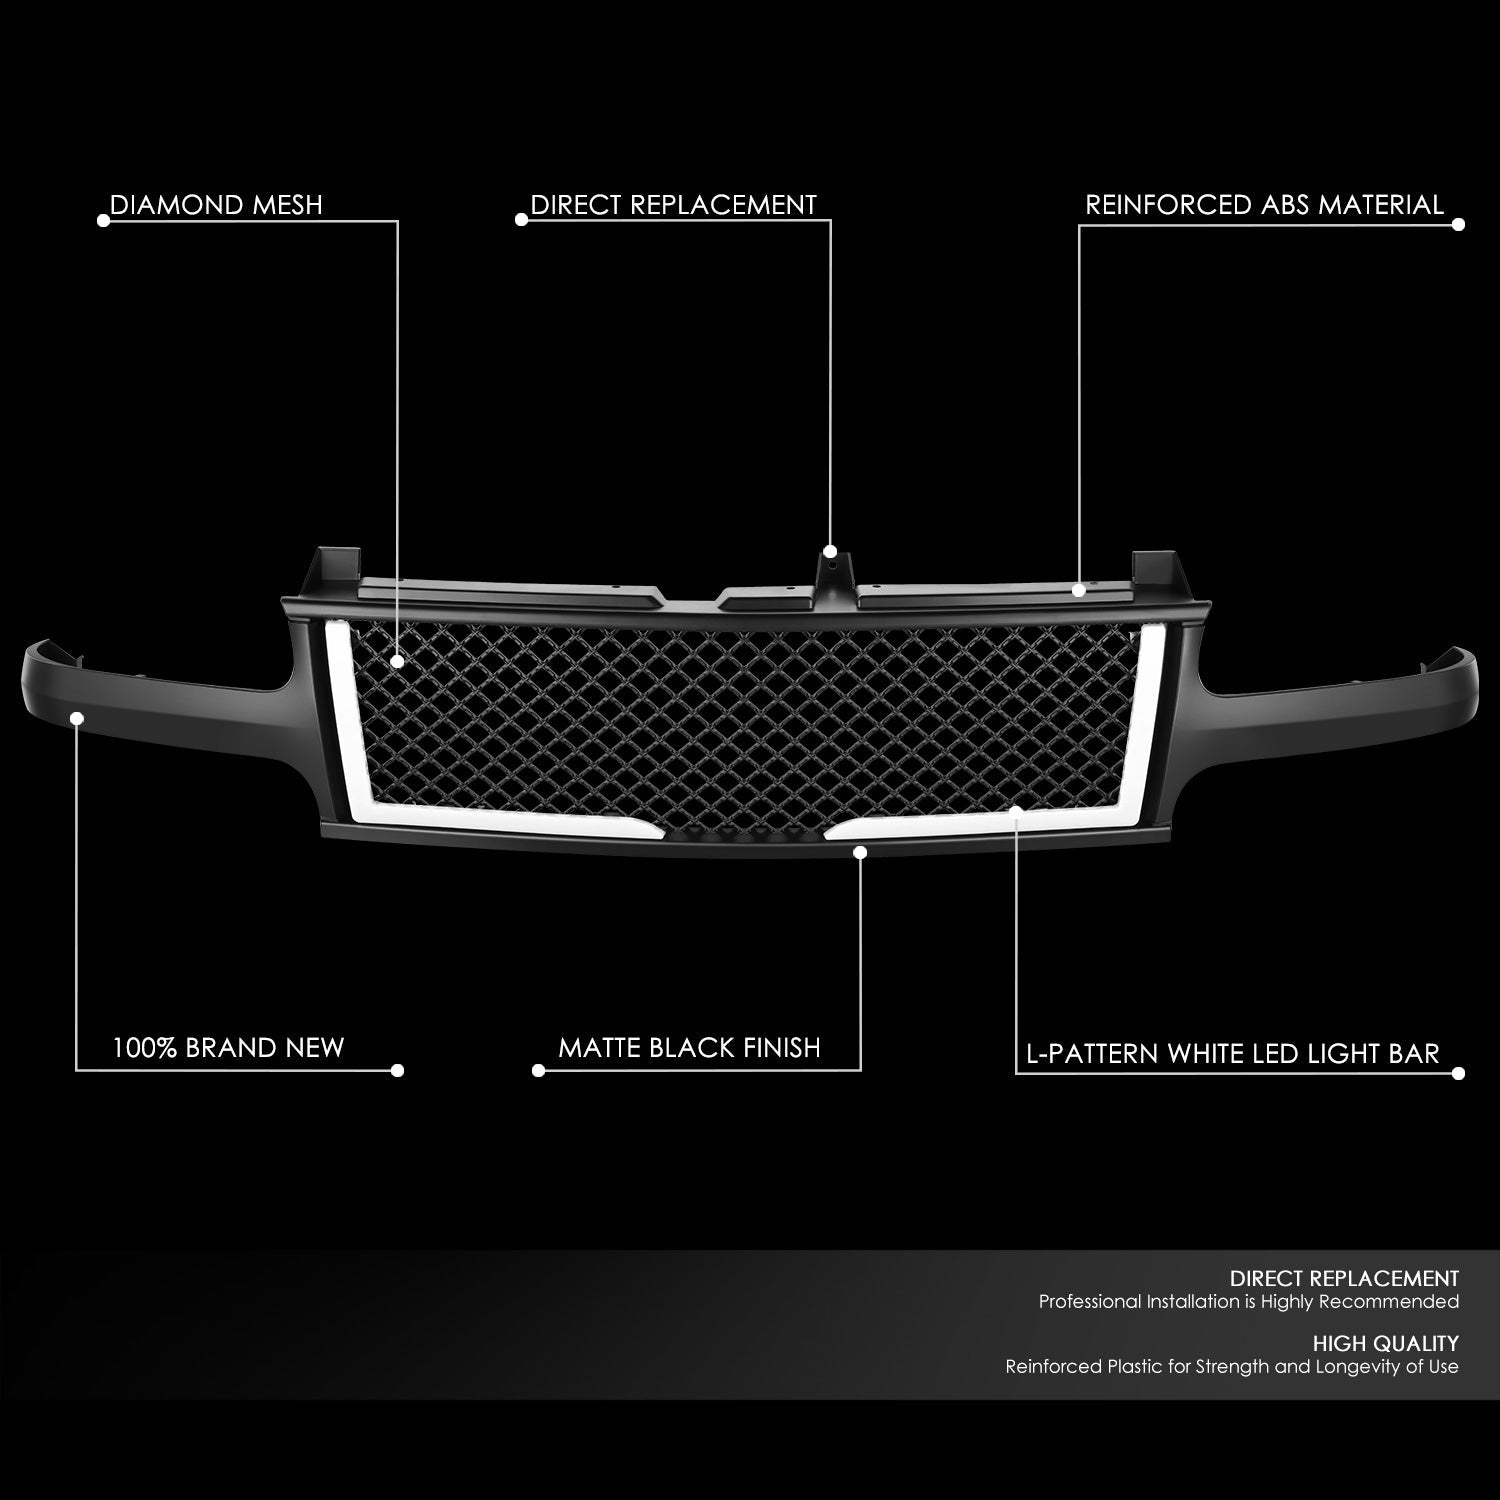 99-02 Chevy Silverado 00-06 Suburban Tahoe LED DRL Front Grille - Honeycomb Mesh